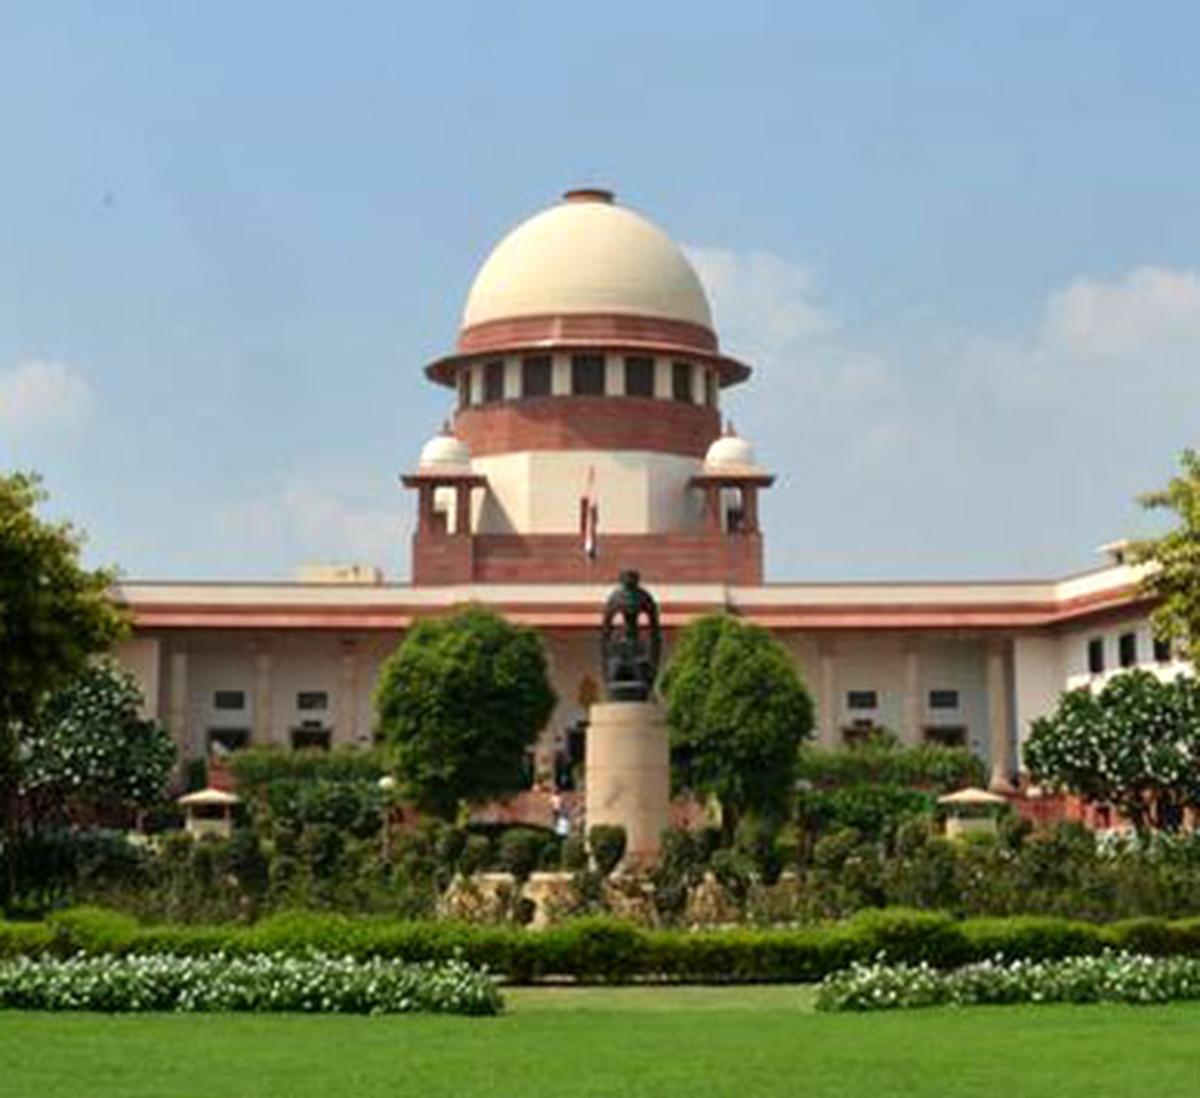 A healthy man should provide for wife, children even by physical labour: Supreme Court